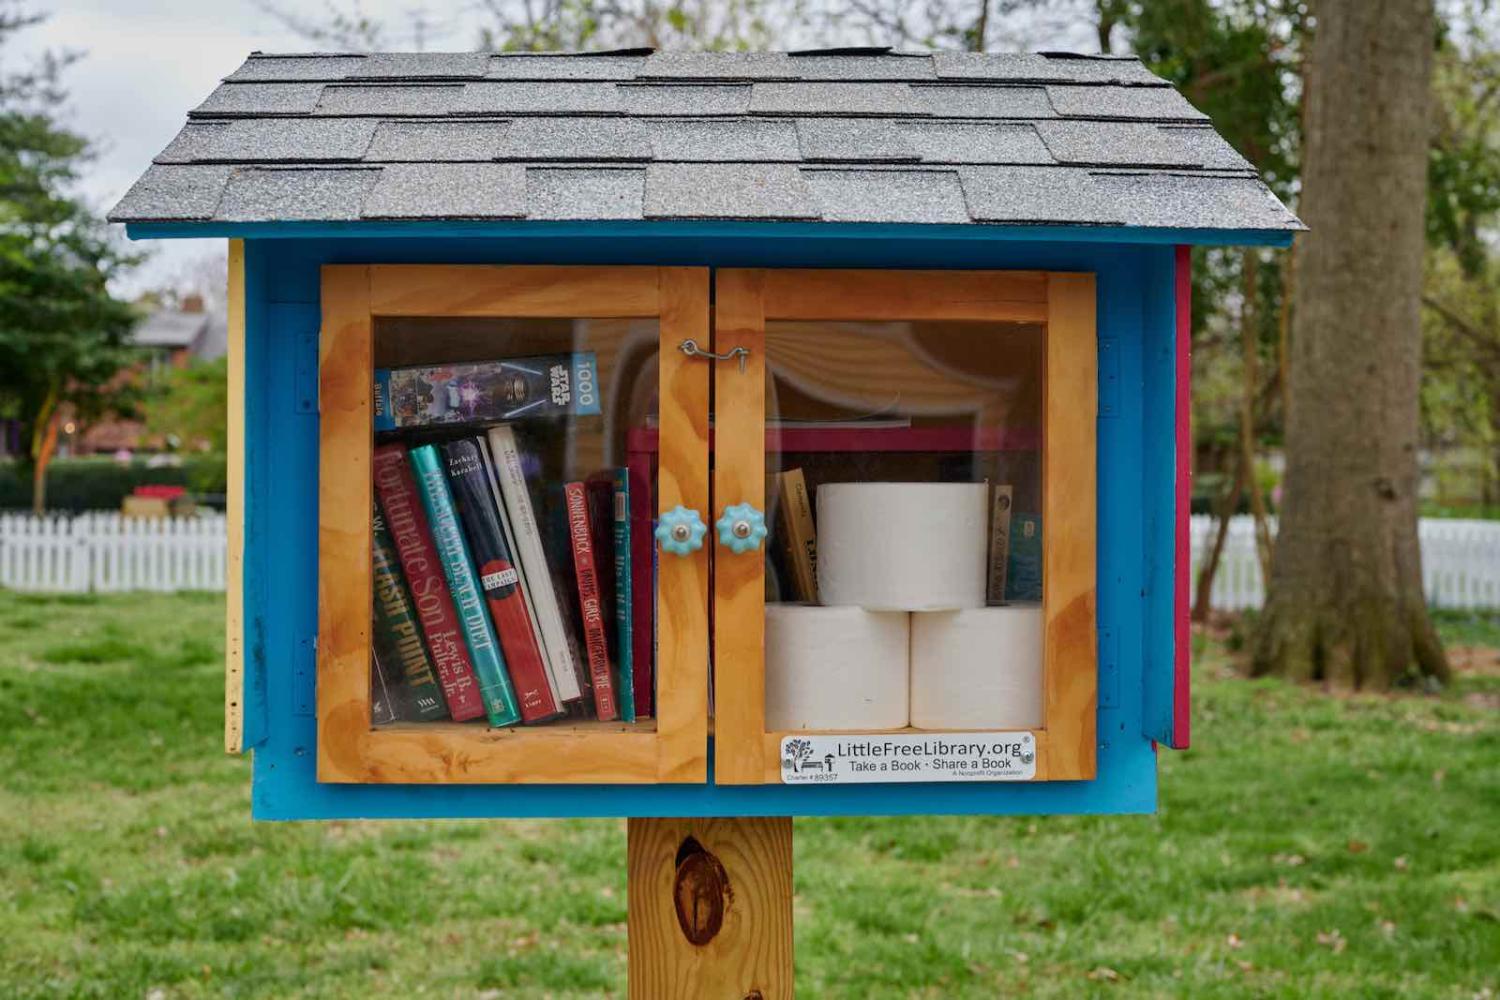 Adapting to lockdown, a street library in Richmond, Virginia (Ronnie Pitman/Flickr)